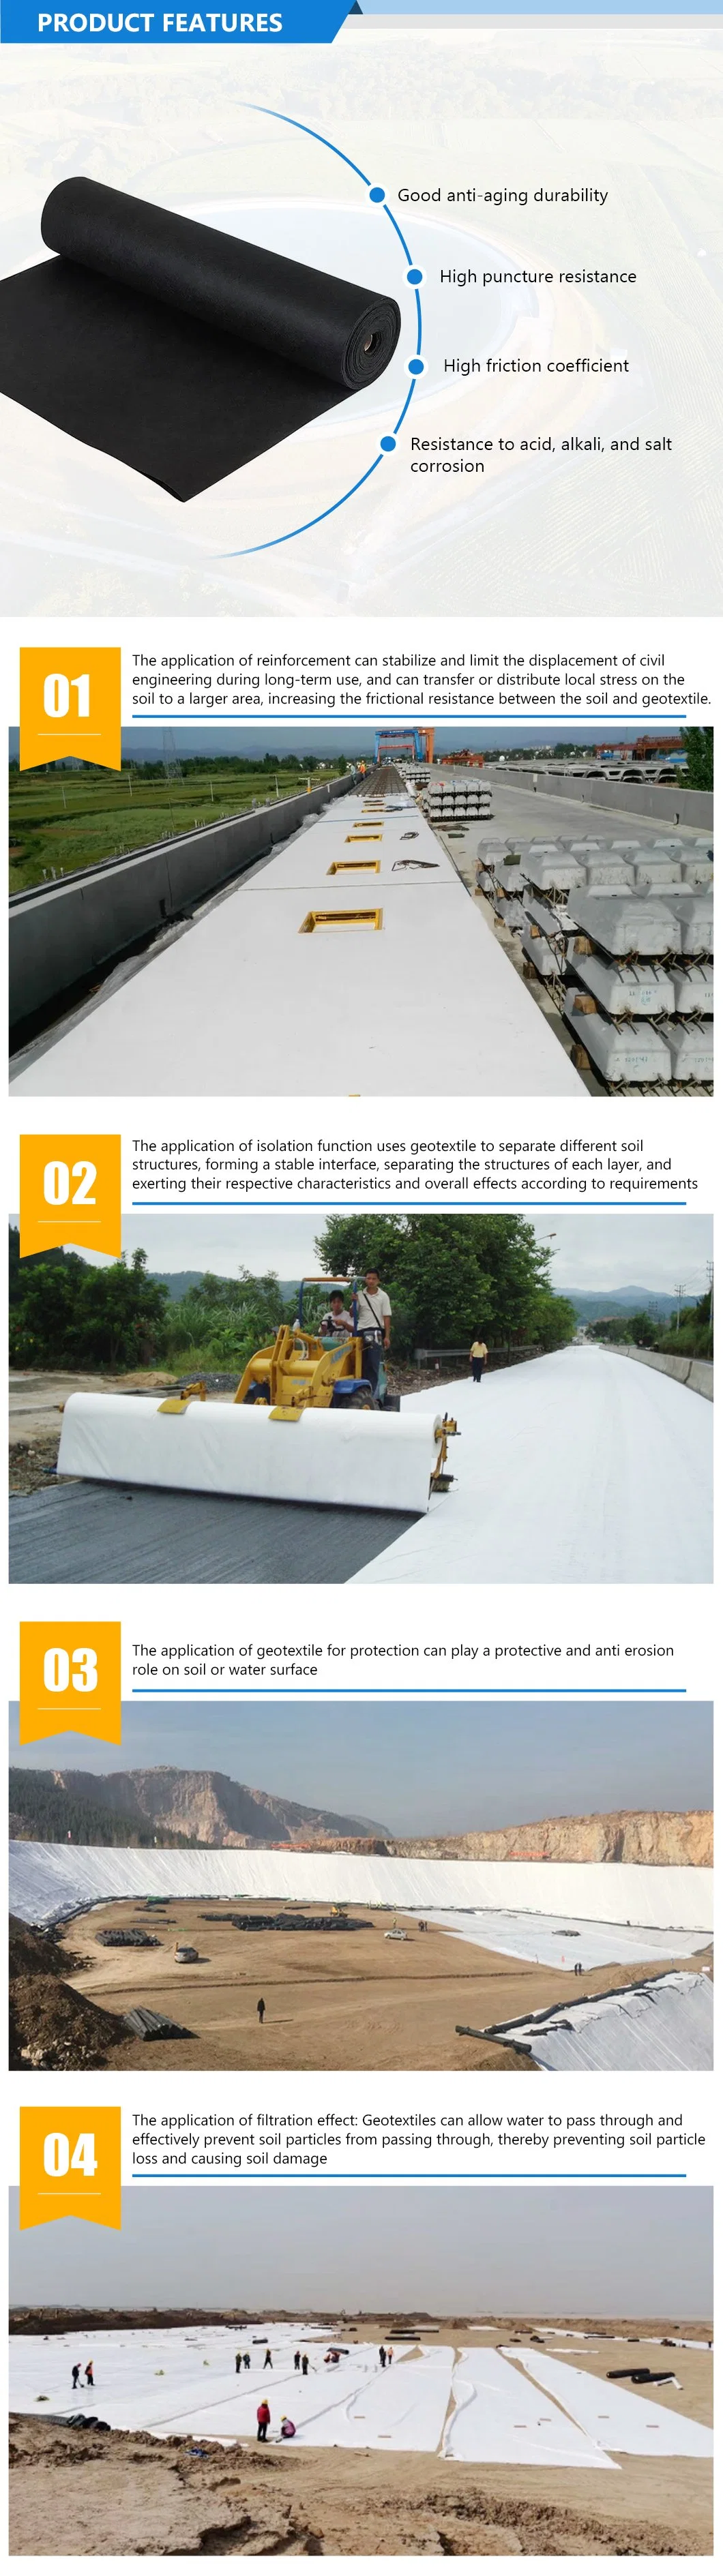 PP Polypropylene/Polyester Staple/Short Fiber Non Woven Geotextile Manufacturer for Solation, Reinforcement and Filtration for Mine Tips and Heap Leaching